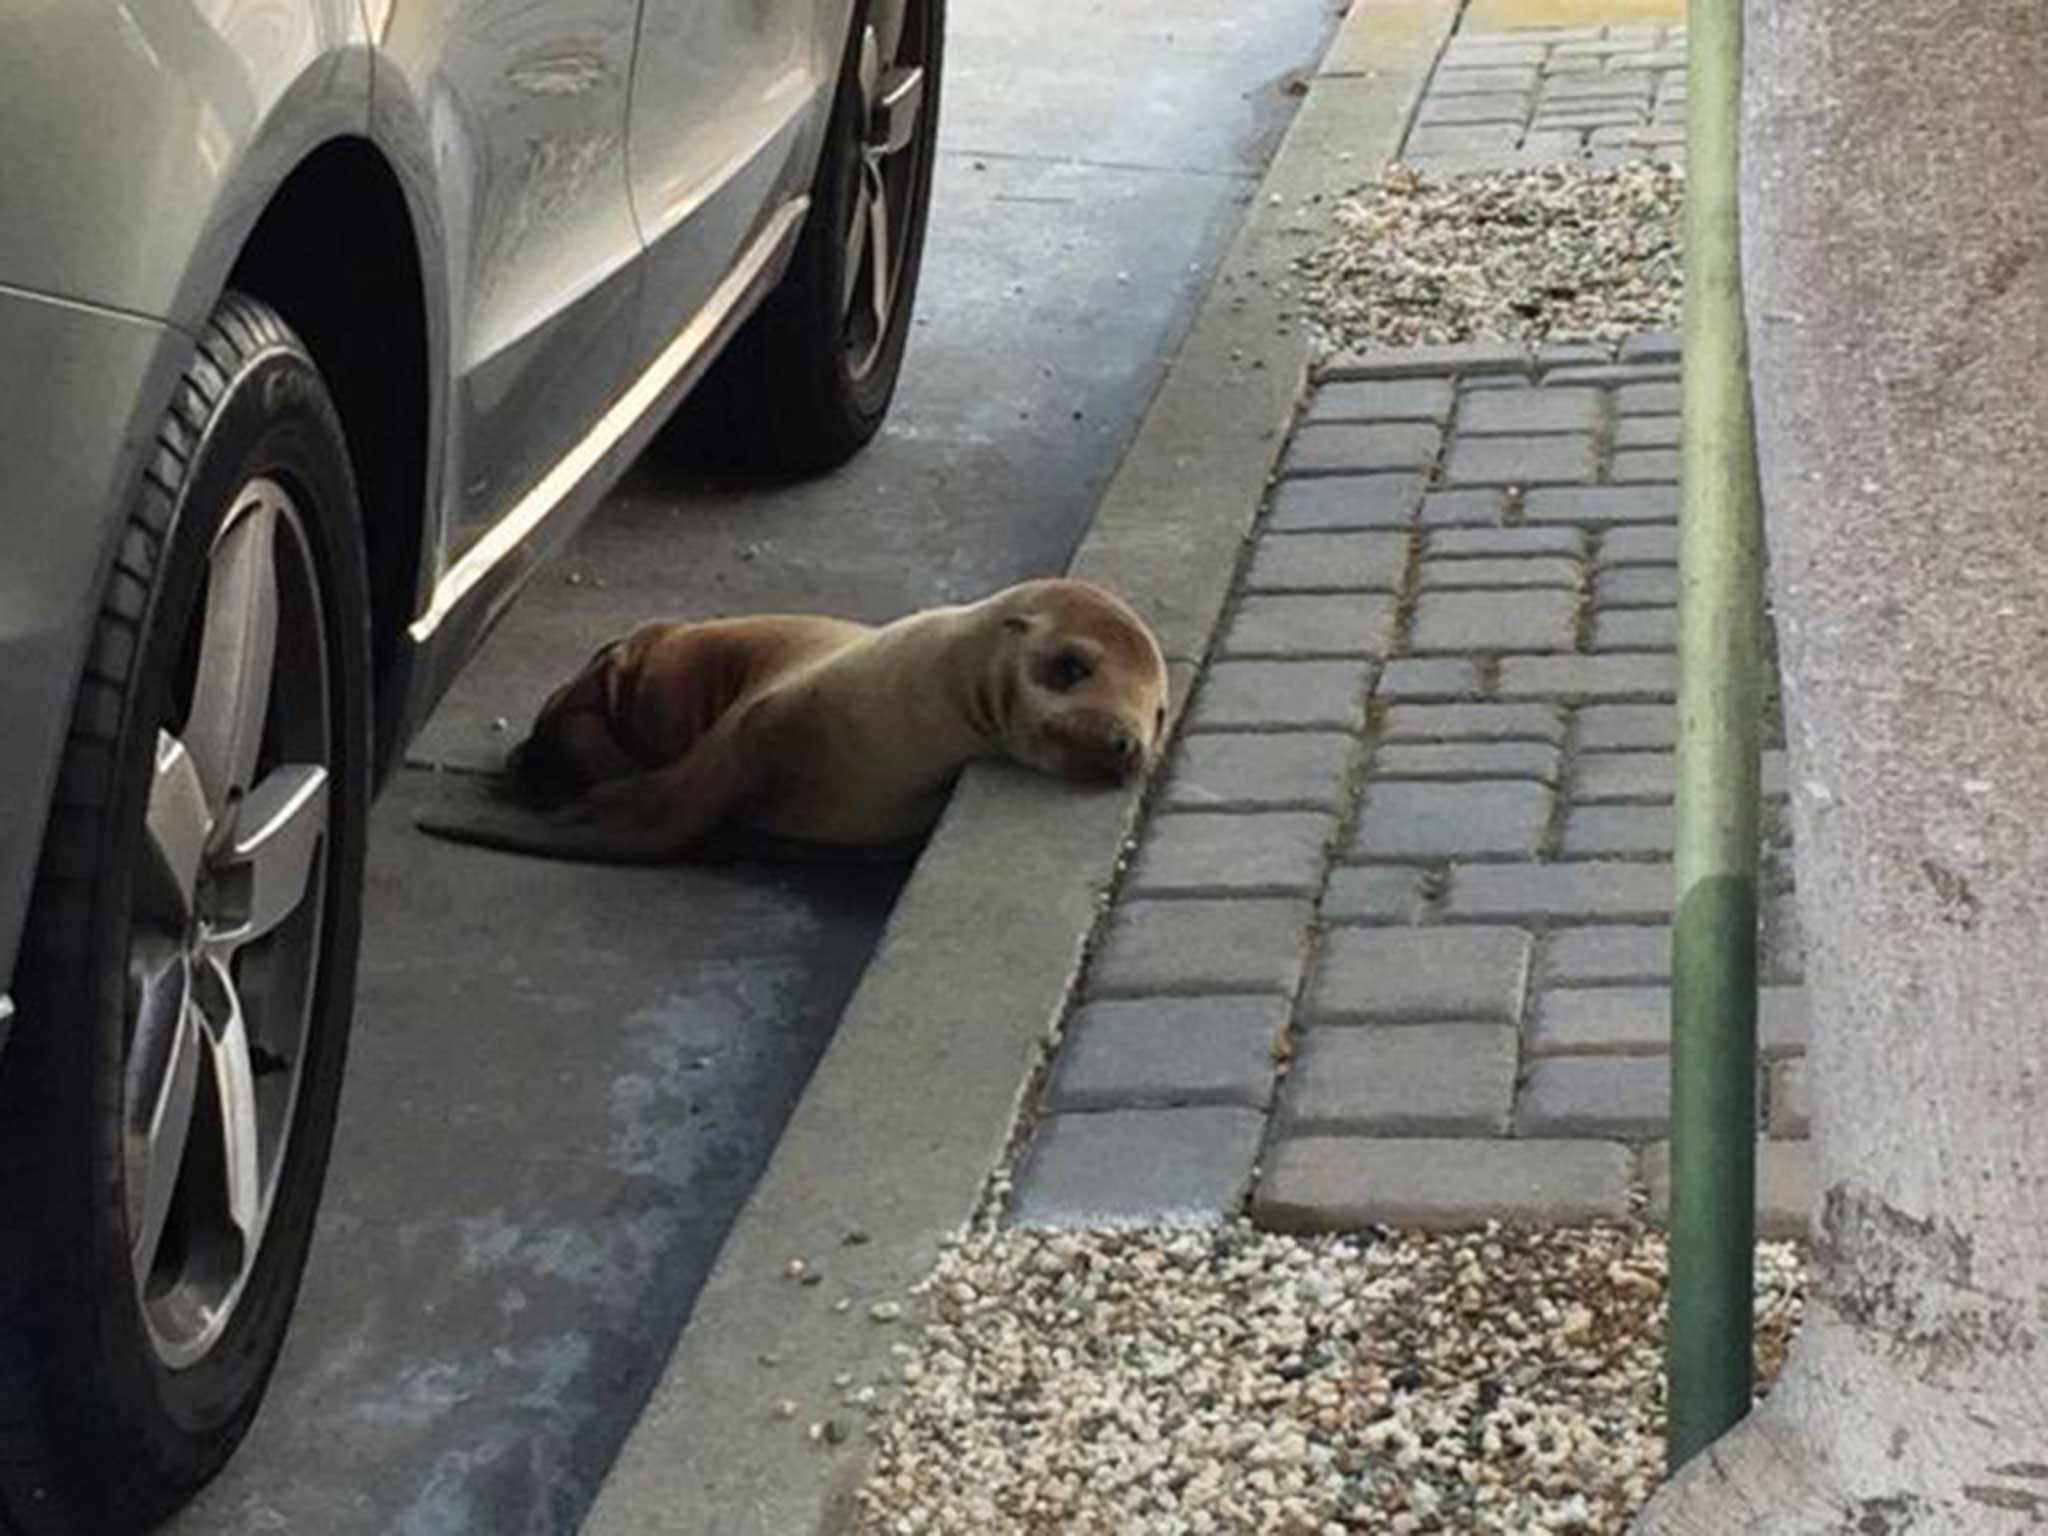 The sea lion was found wandering the streets